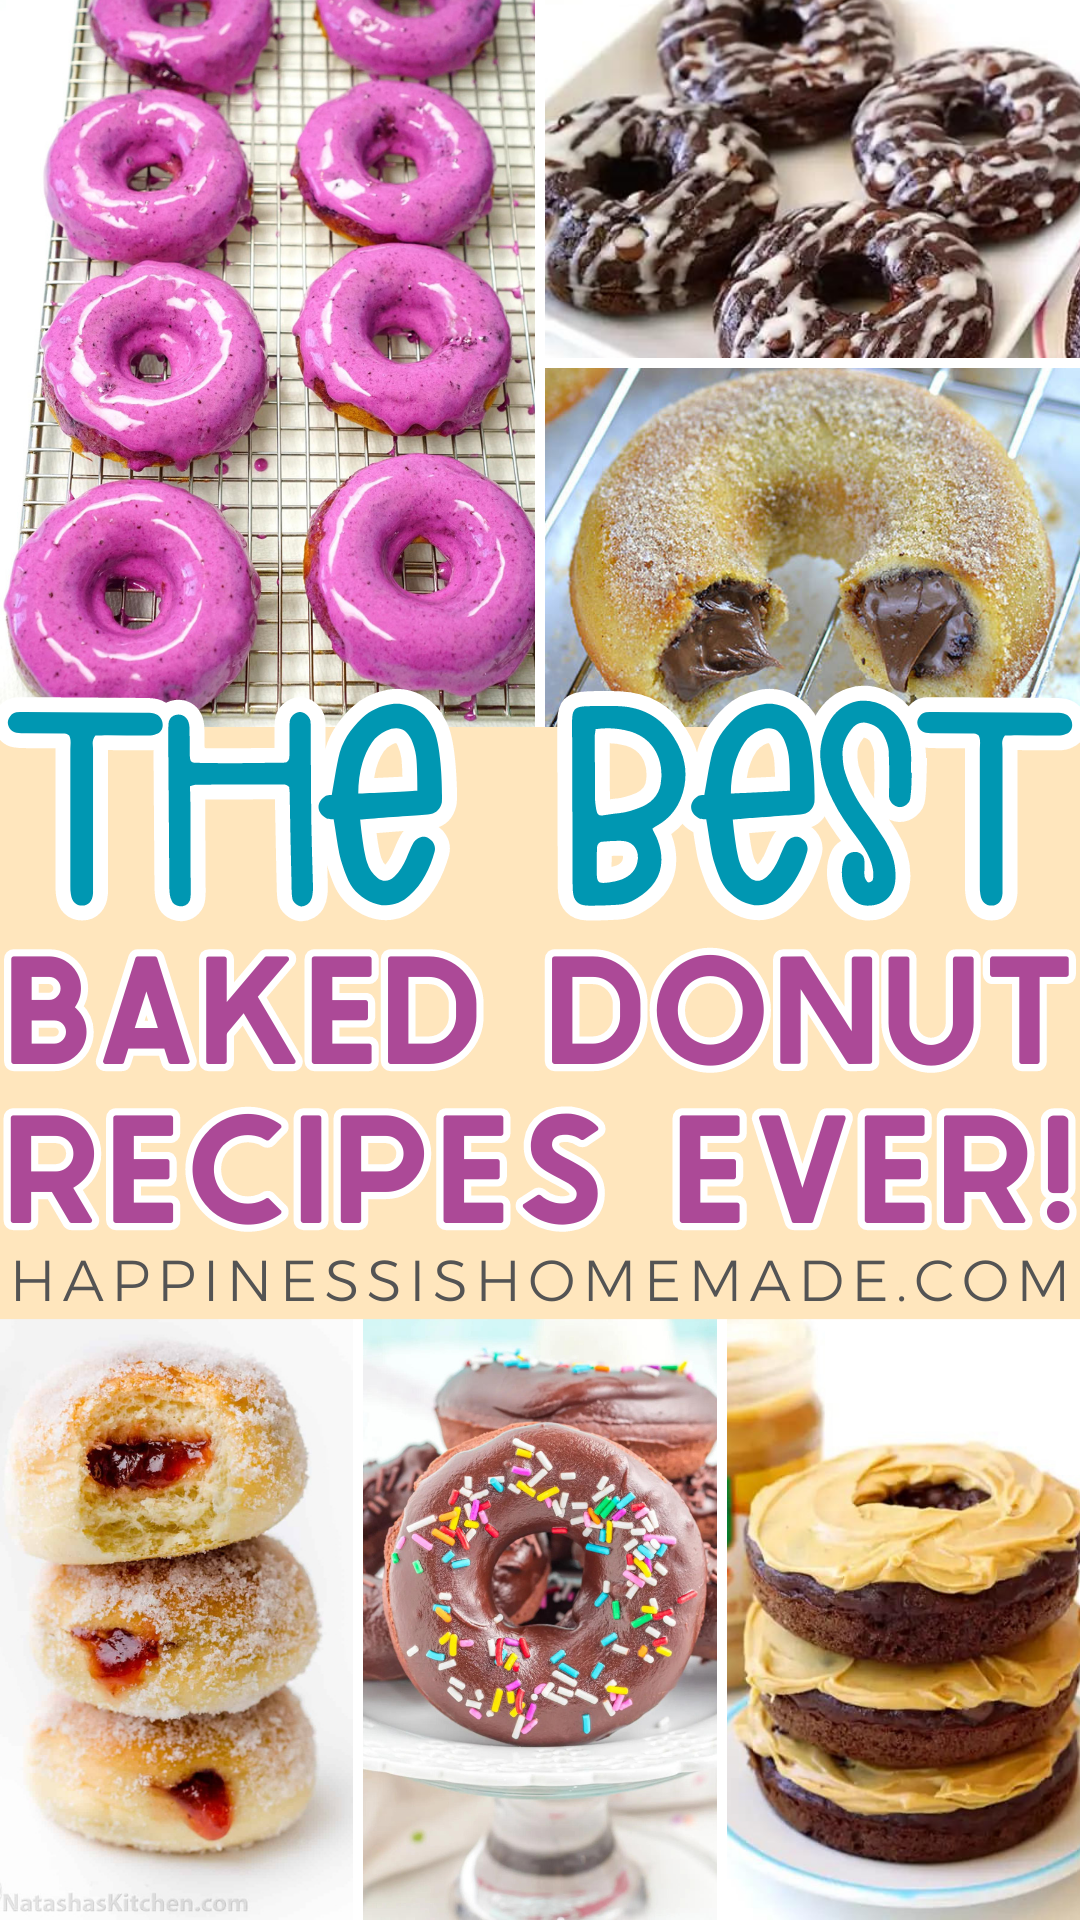 The best baked donut recipes ever